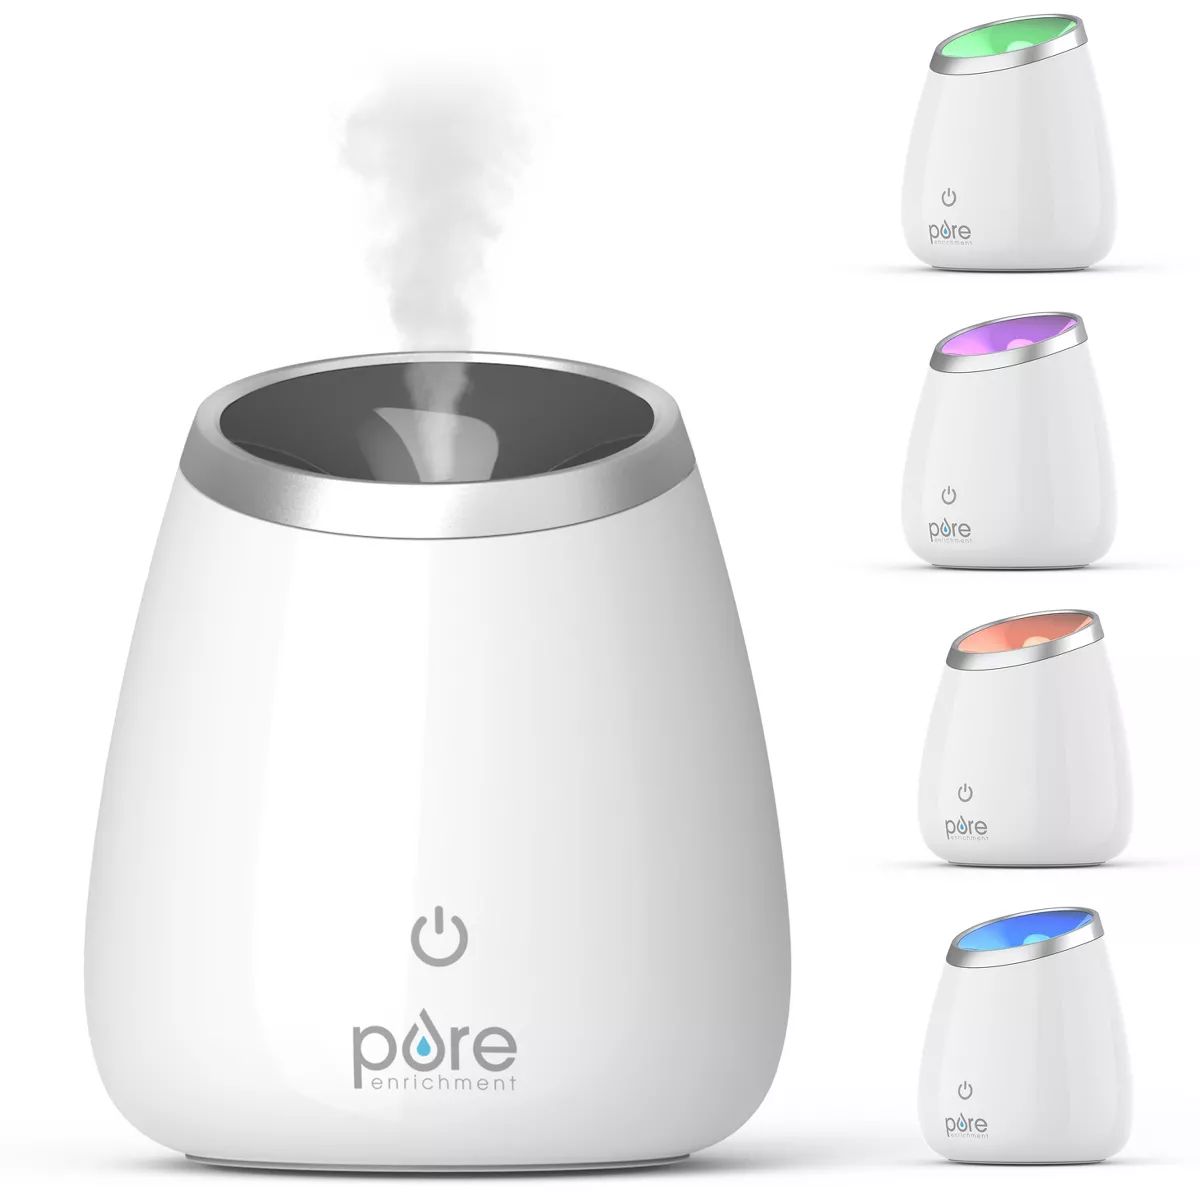 Aromatherapy Oil Diffuser 6.4" - PureSpa | Target